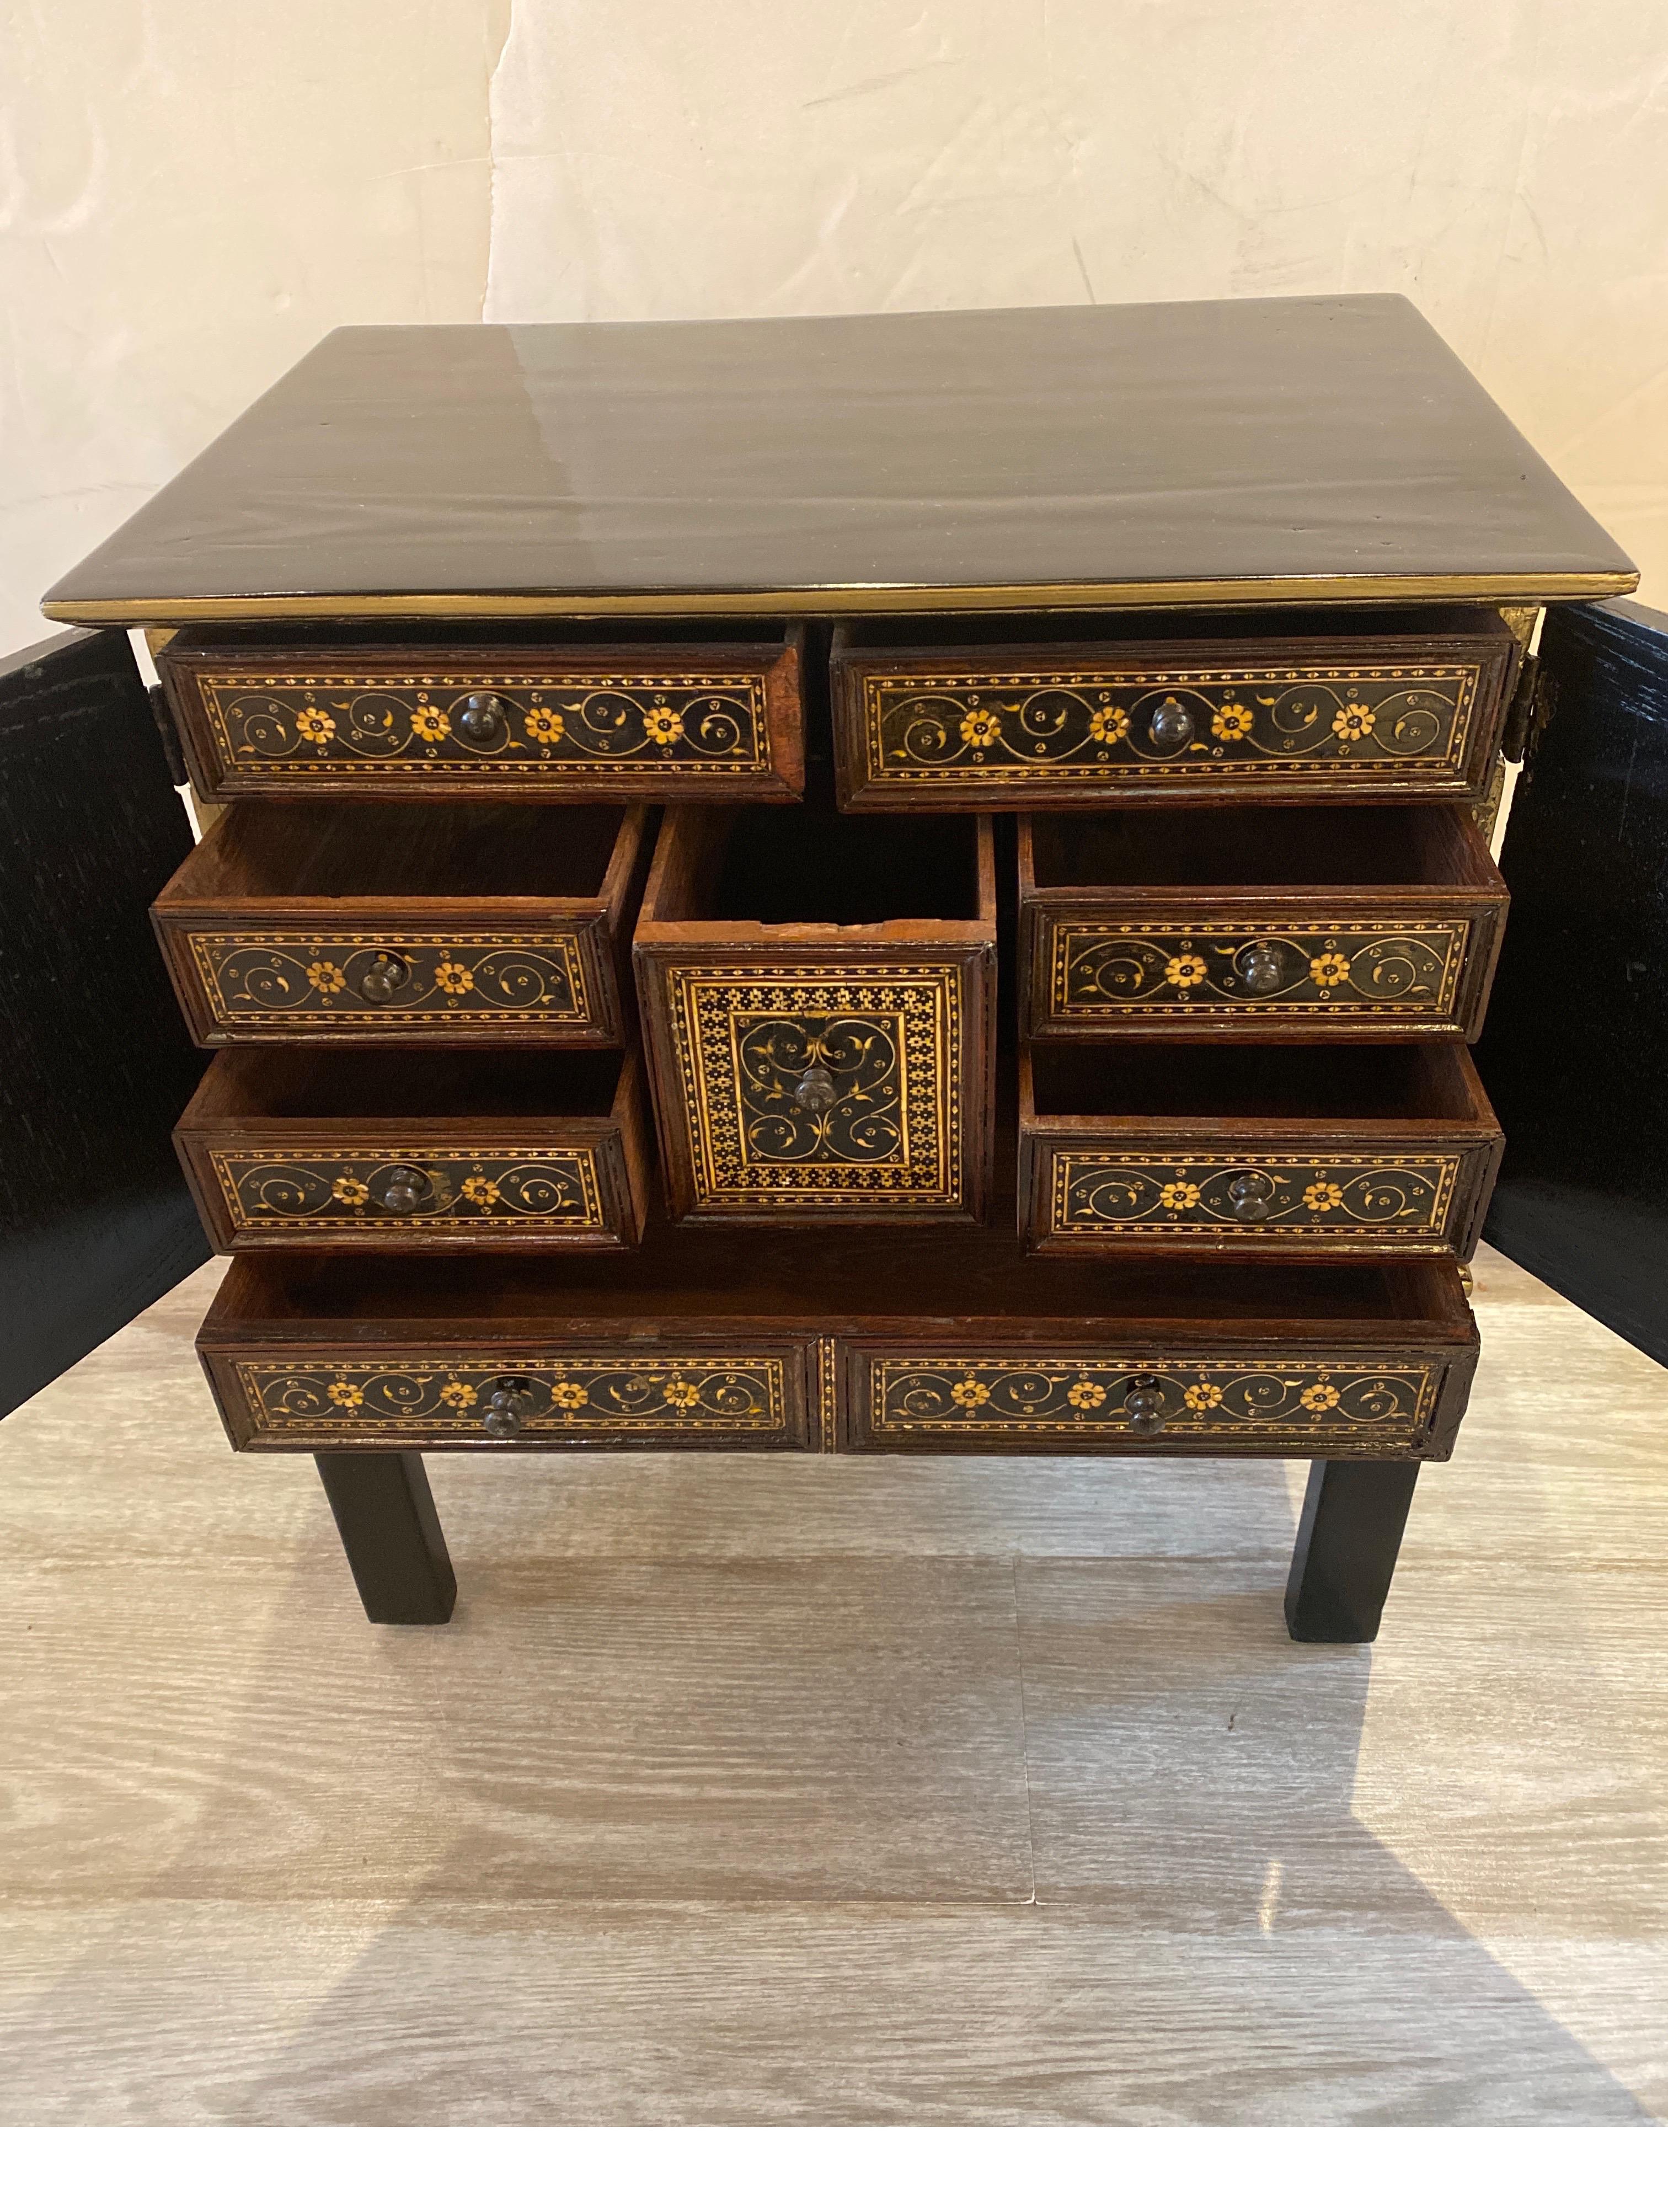 Inlay Diminutive Anglo-Indian Black and Gold Lacquered Spice Cabinet